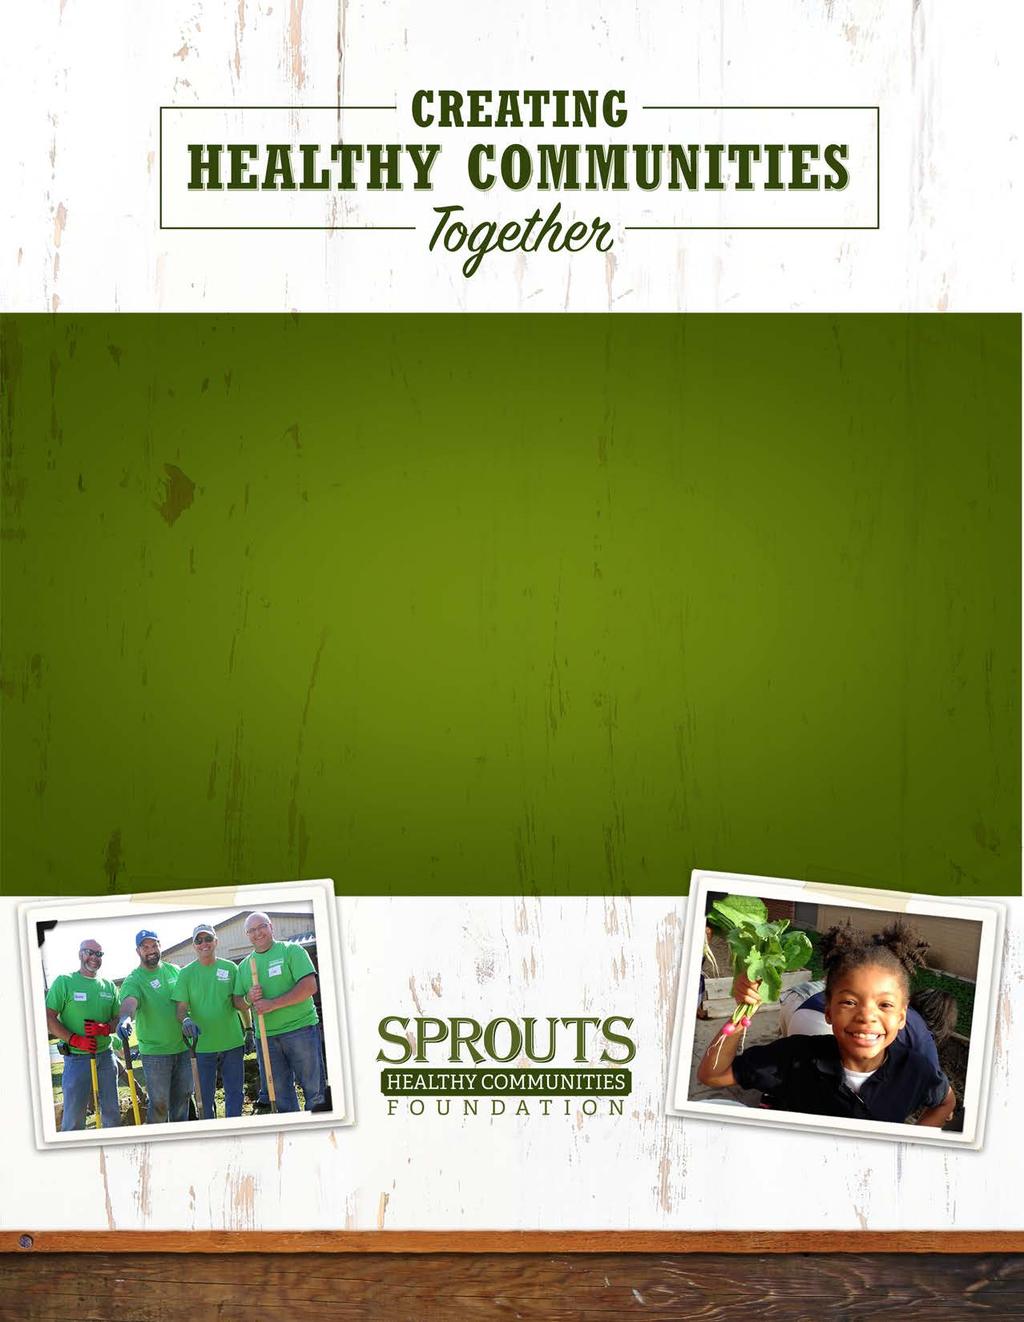 The Sprouts Healthy Communities Foundation supports health and wellness causes that directly impact the neighborhoods where our customers and team members live, work and play.